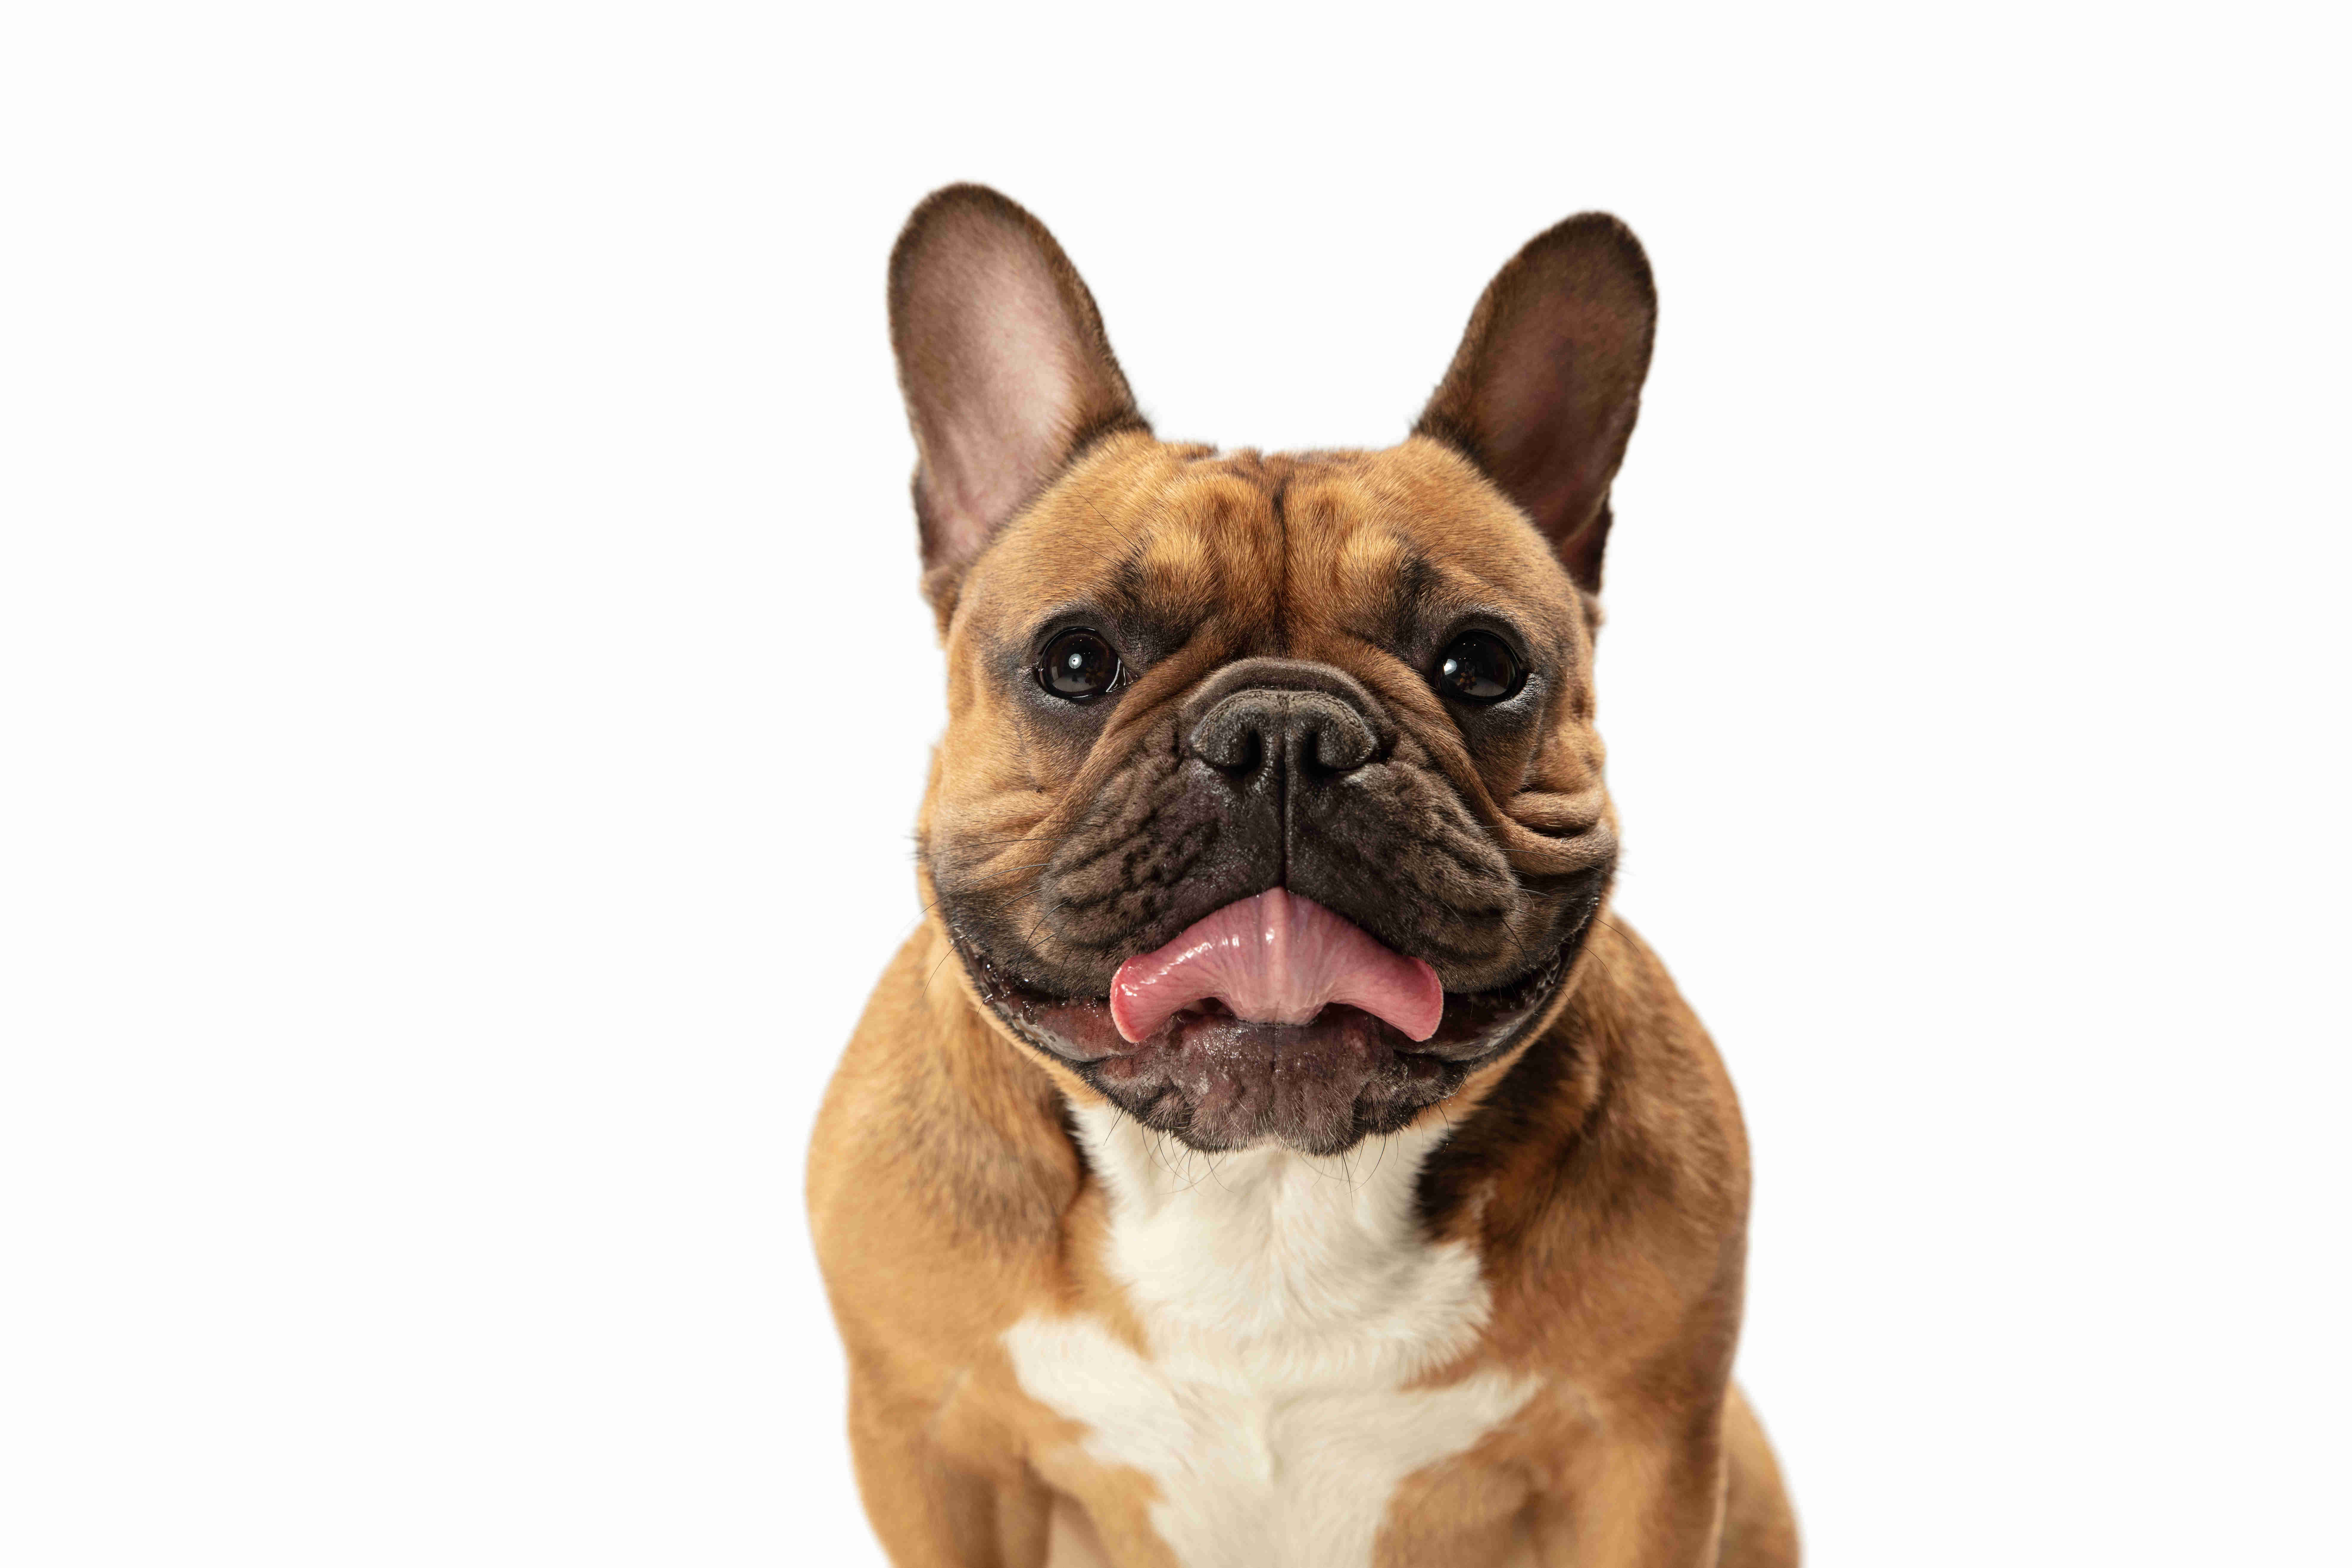 5 Effective Ways to Teach Your French Bulldog Puppy to Stay Calm During Ear Cleaning